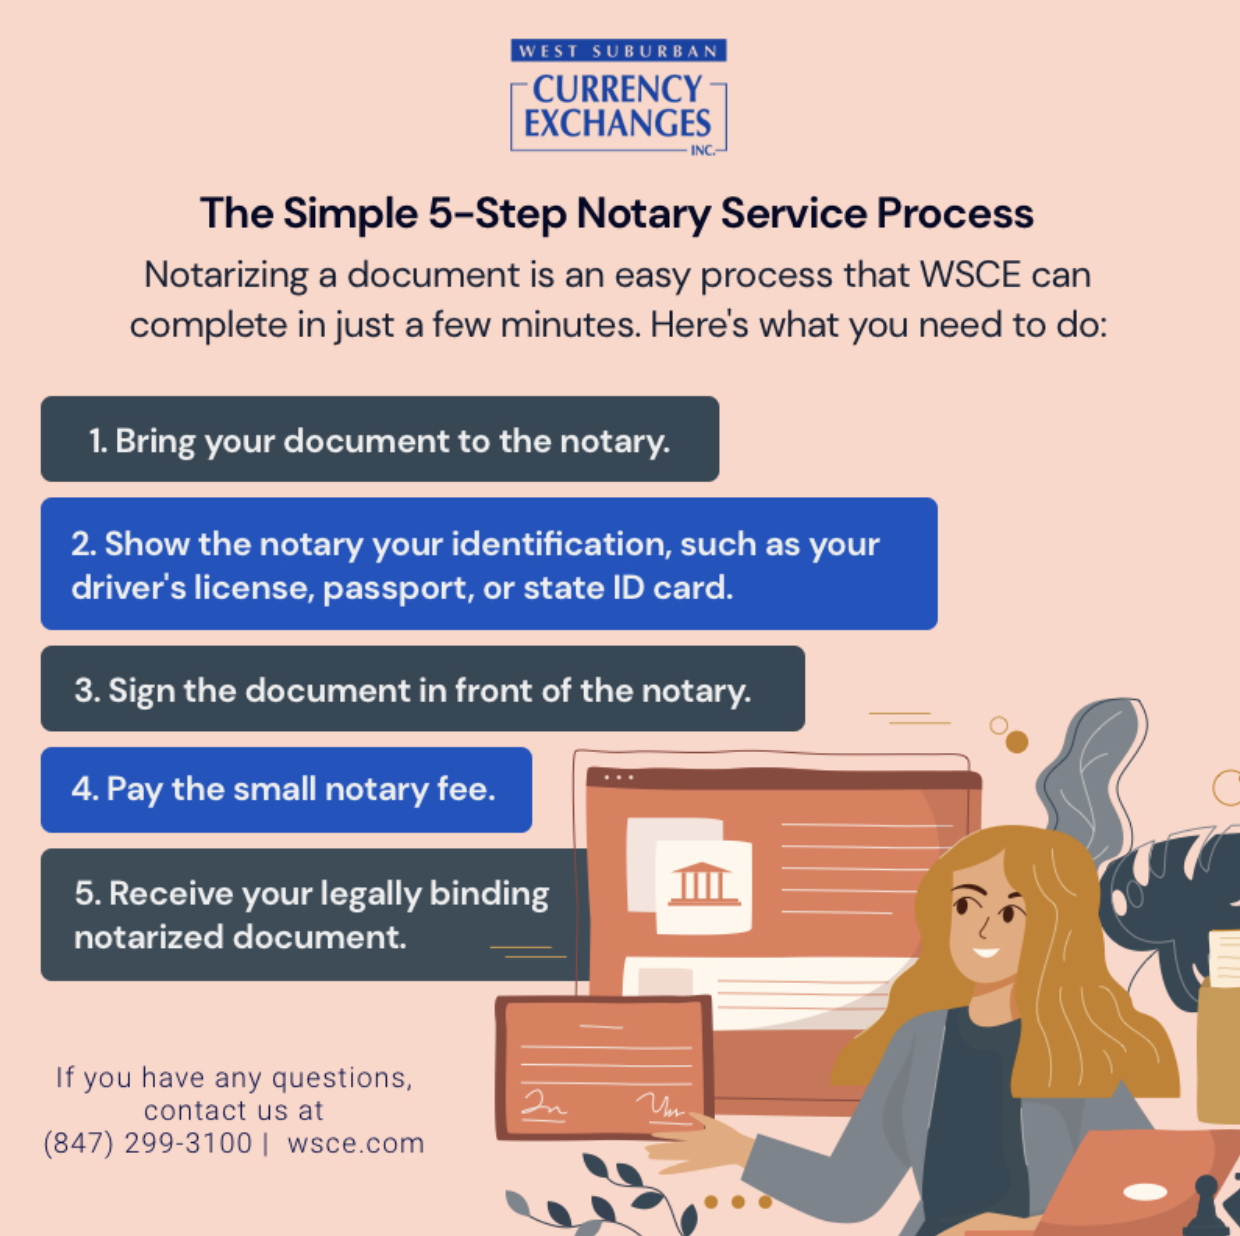 Notarizing a document is an easy process that WSCE can complete in just a few minutes. Here's what you need to do: 1. Bring your document to the notary. 2. Show the notary your identification, such as your driver's license, passport, or state ID card. 3. Sign the document in front of the notary. 4. Pay the small notary fee. 5. Receive your legally binding notarized document.